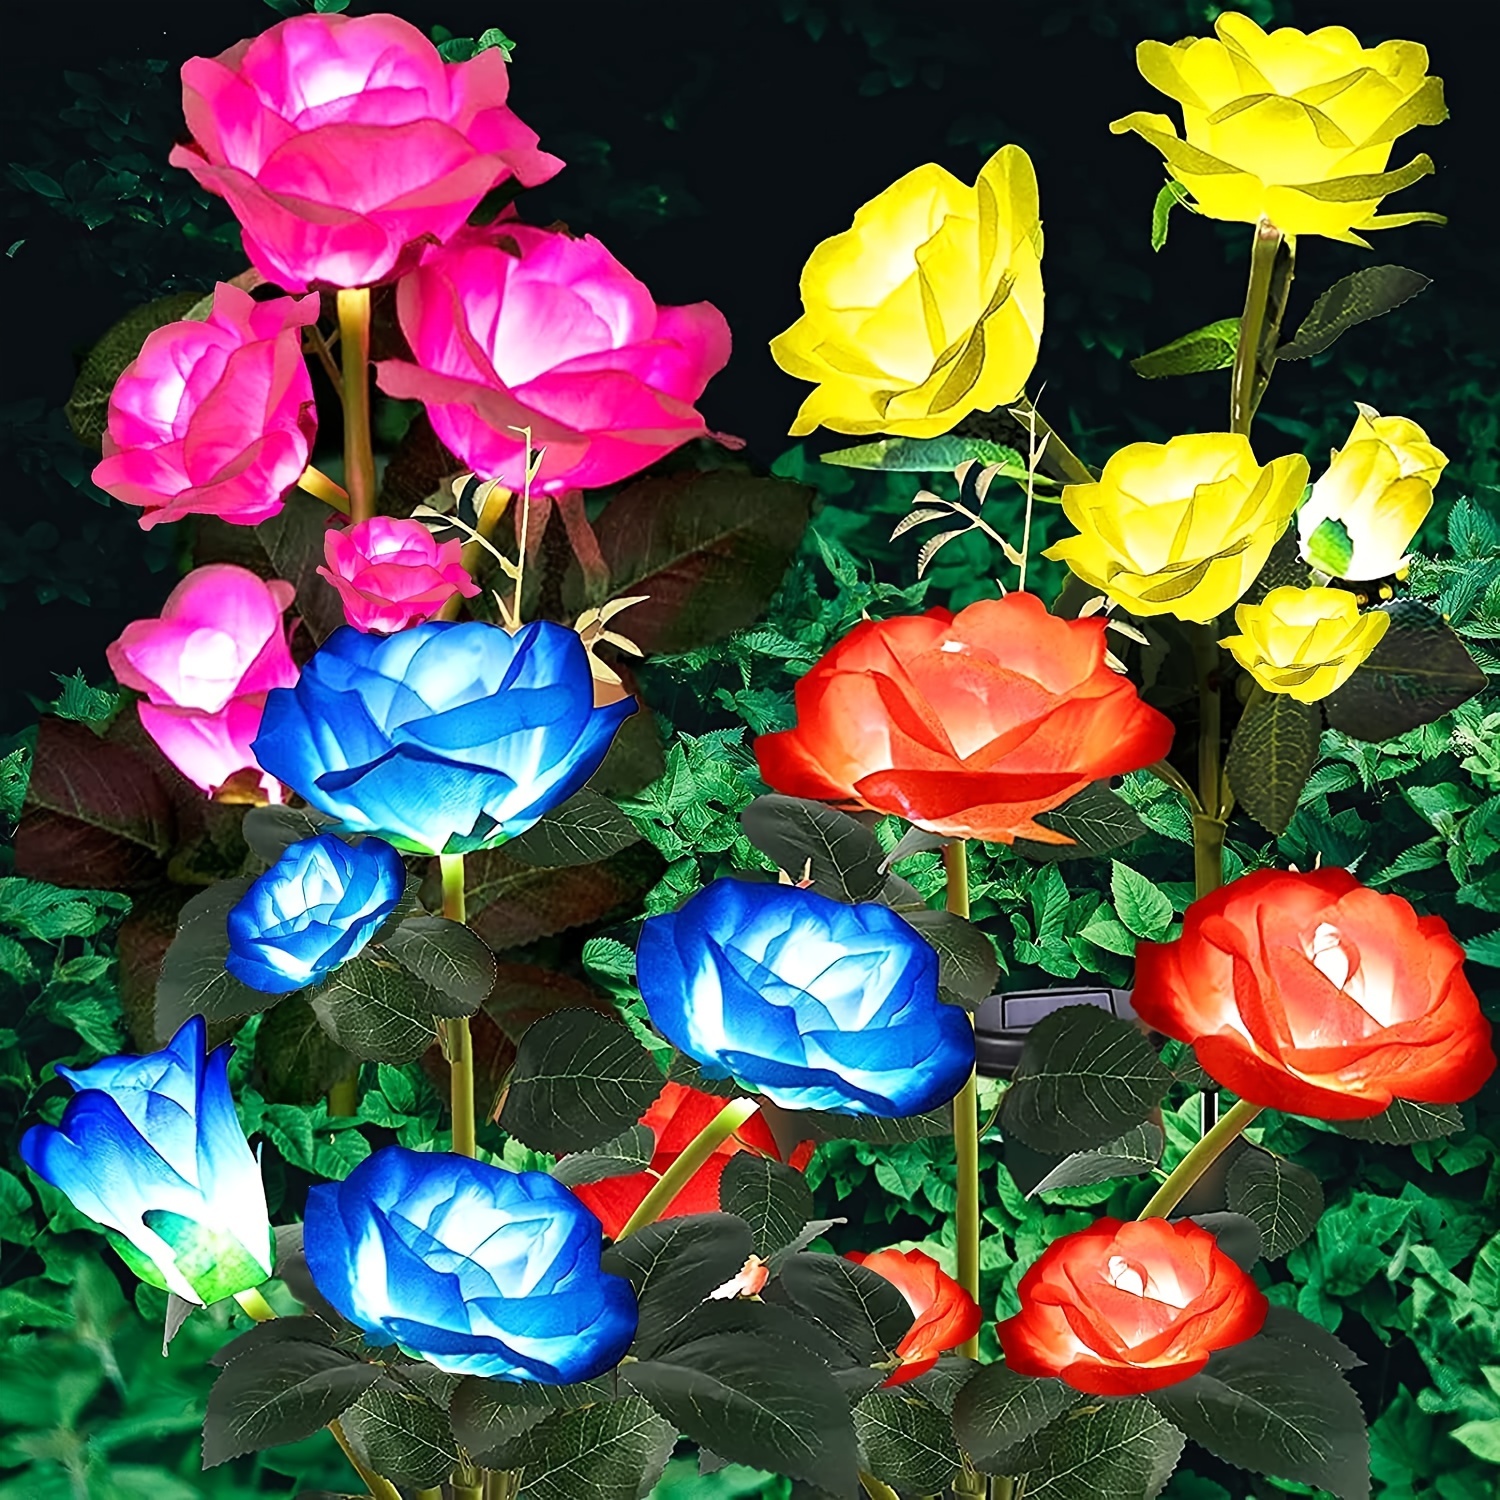 1pc 2pcs 4pcs solar flowers garden lights decorative 7 color changing rose lights 5 head rose for pathway patio yard party wedding valentines day outdoor decoration details 0